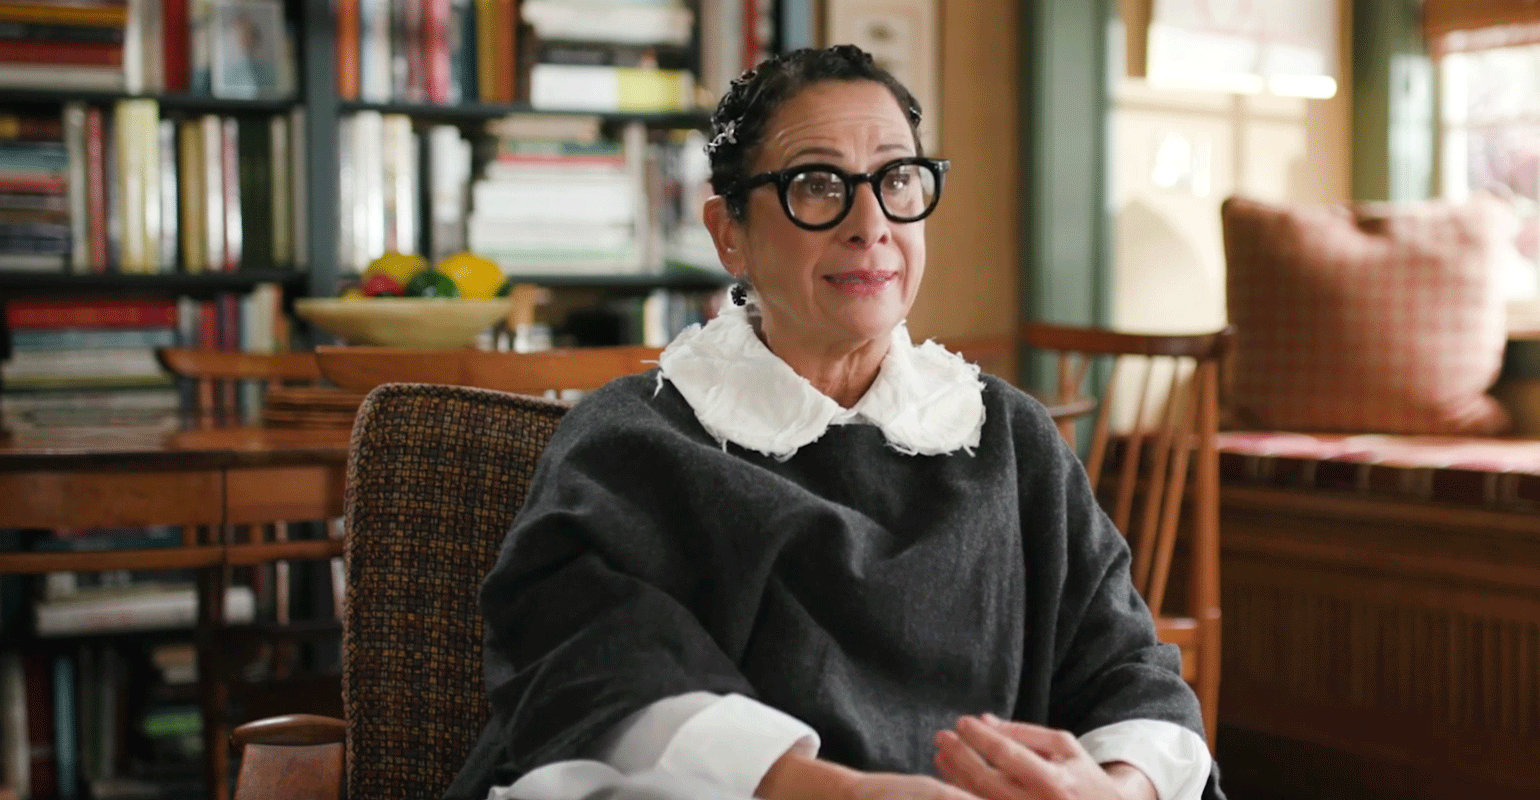 Video of the week: Nancy Silverton to launch special-edition breads